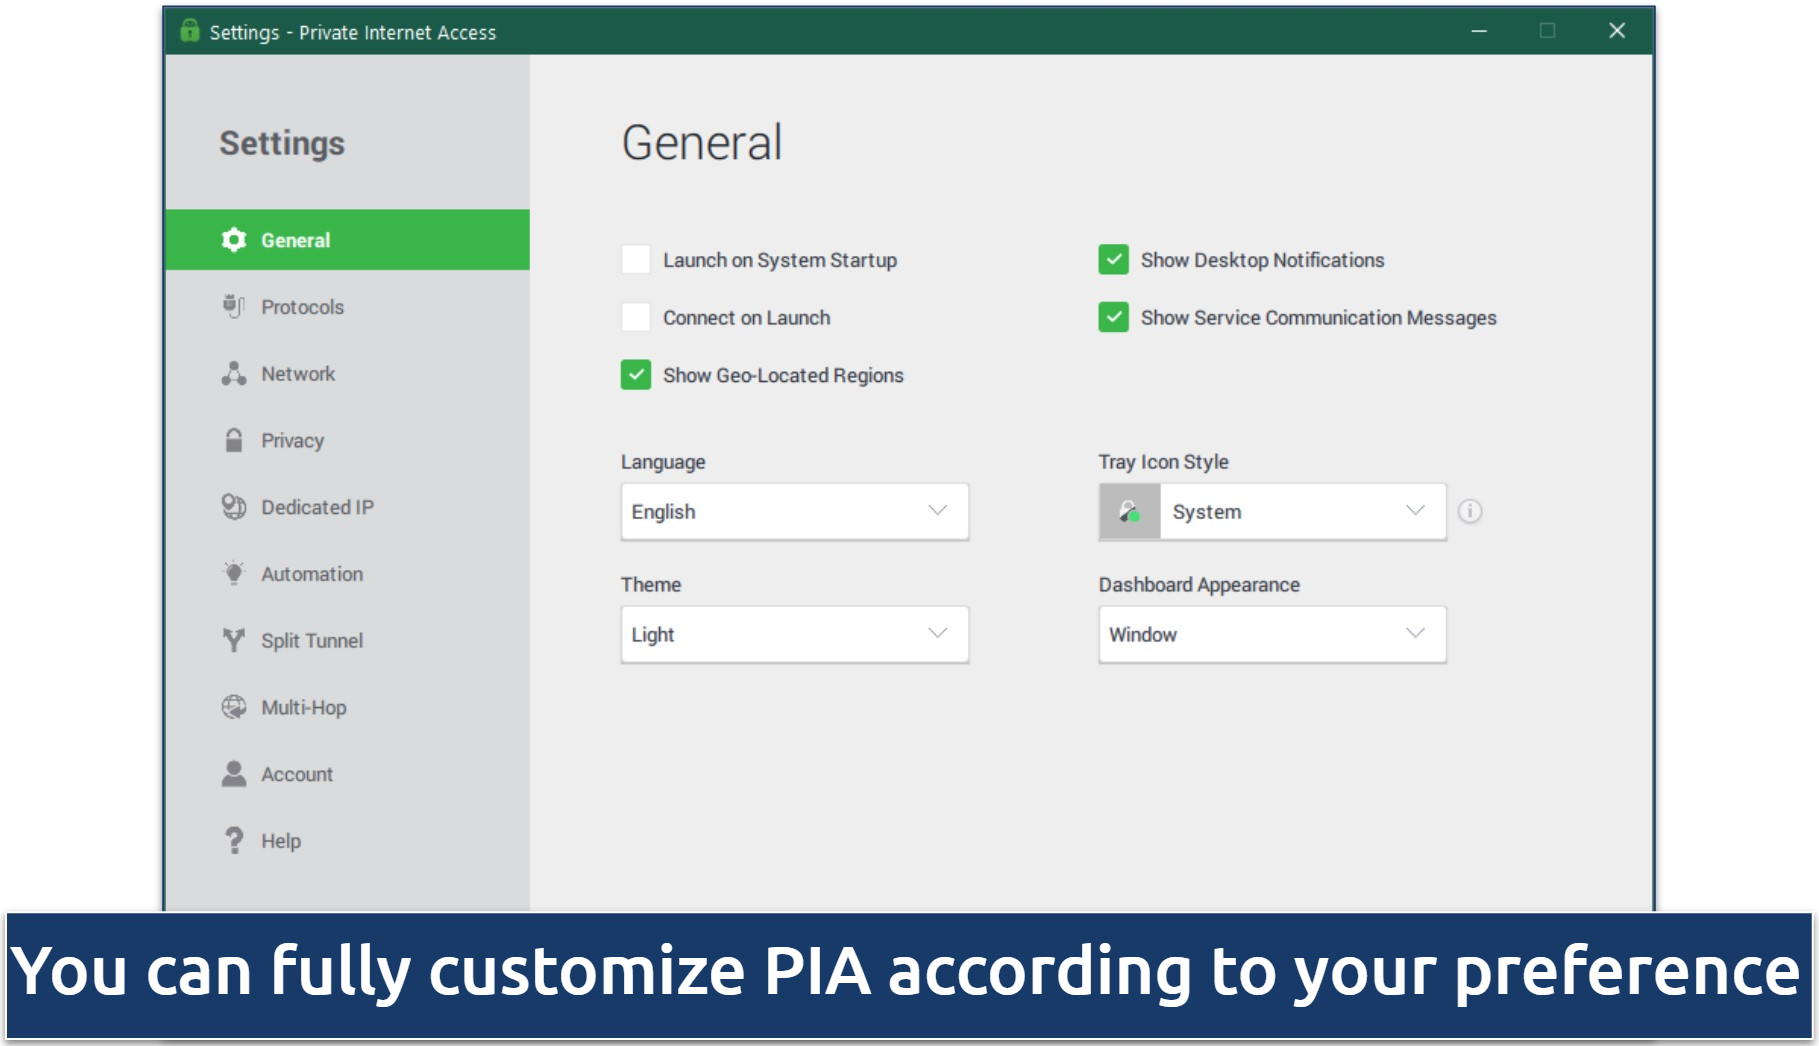 Screenshot of PIA's Windows interface showing its general settings for streaming the Masters